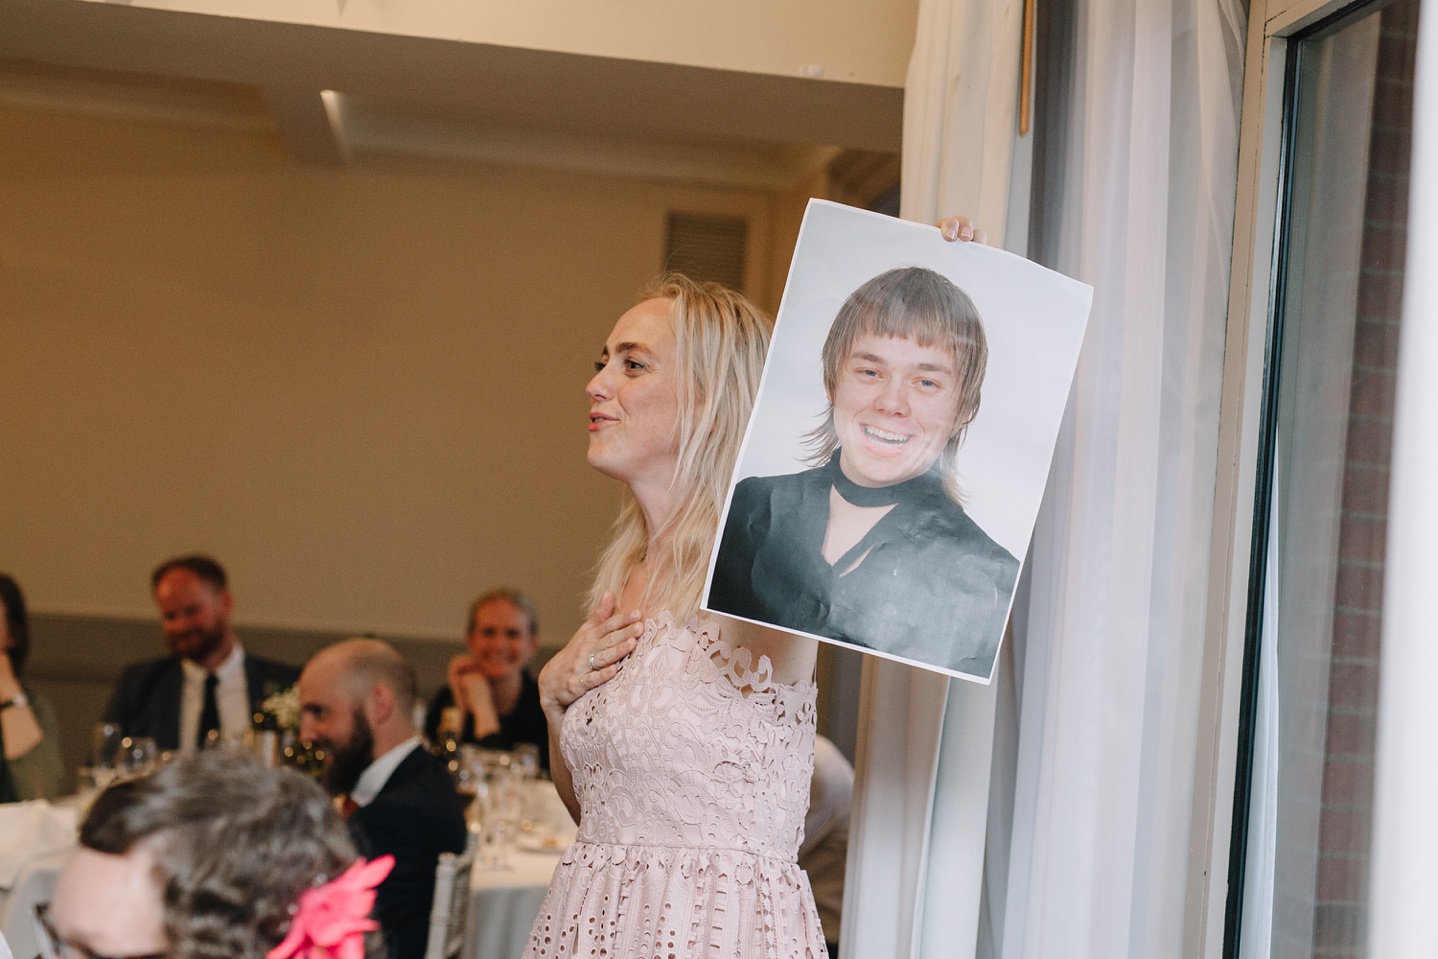 grooms sister holding up embarrassing photo of groom